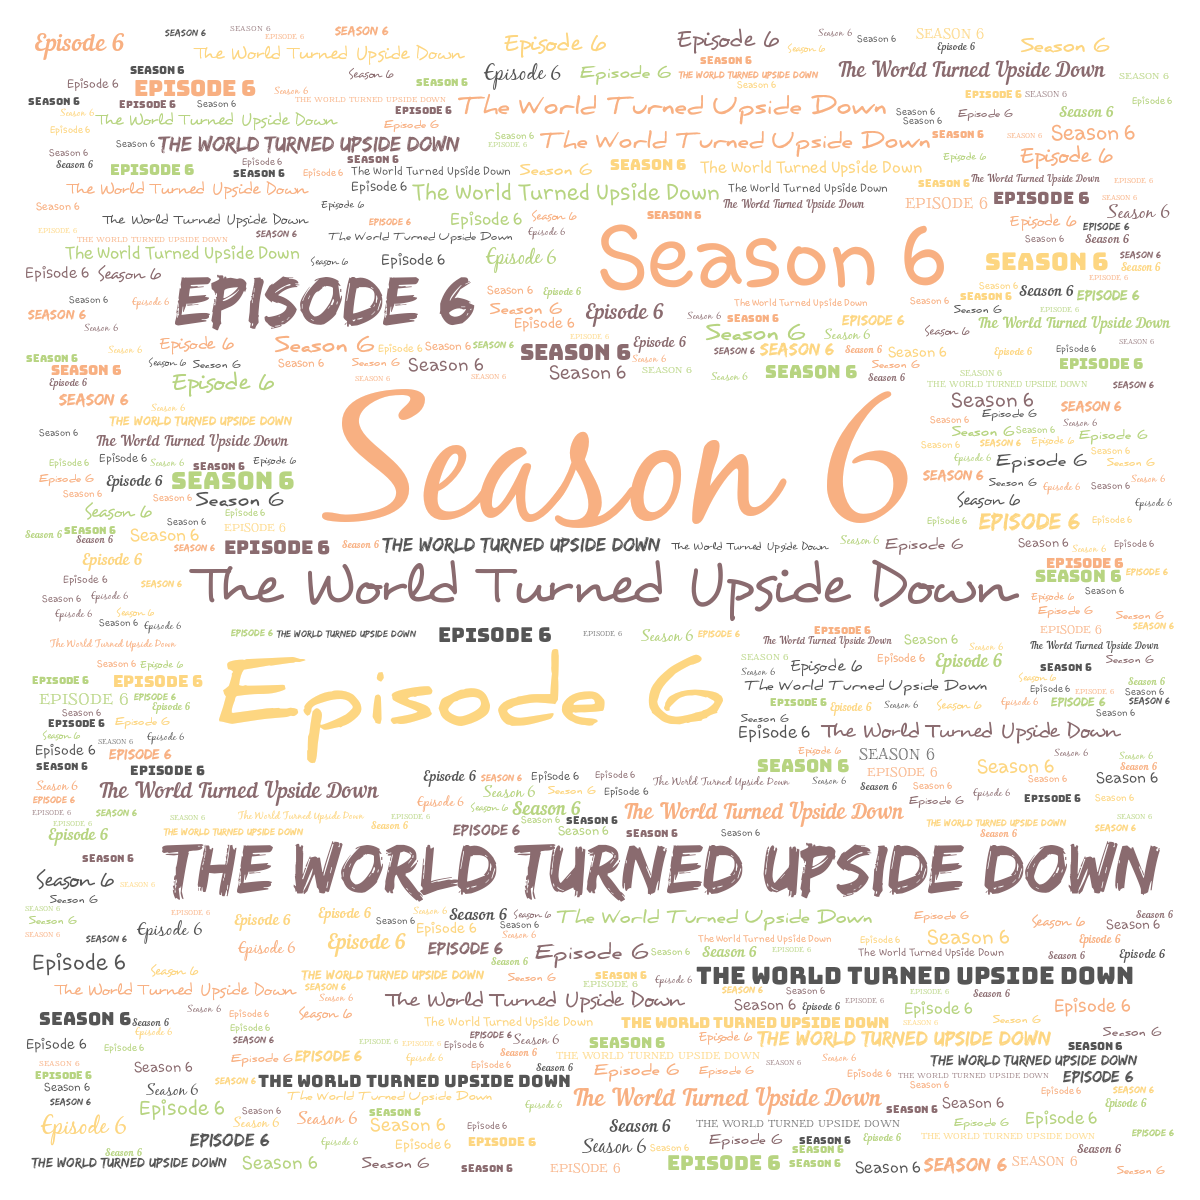 Episode 606: The World Turned Upside Down